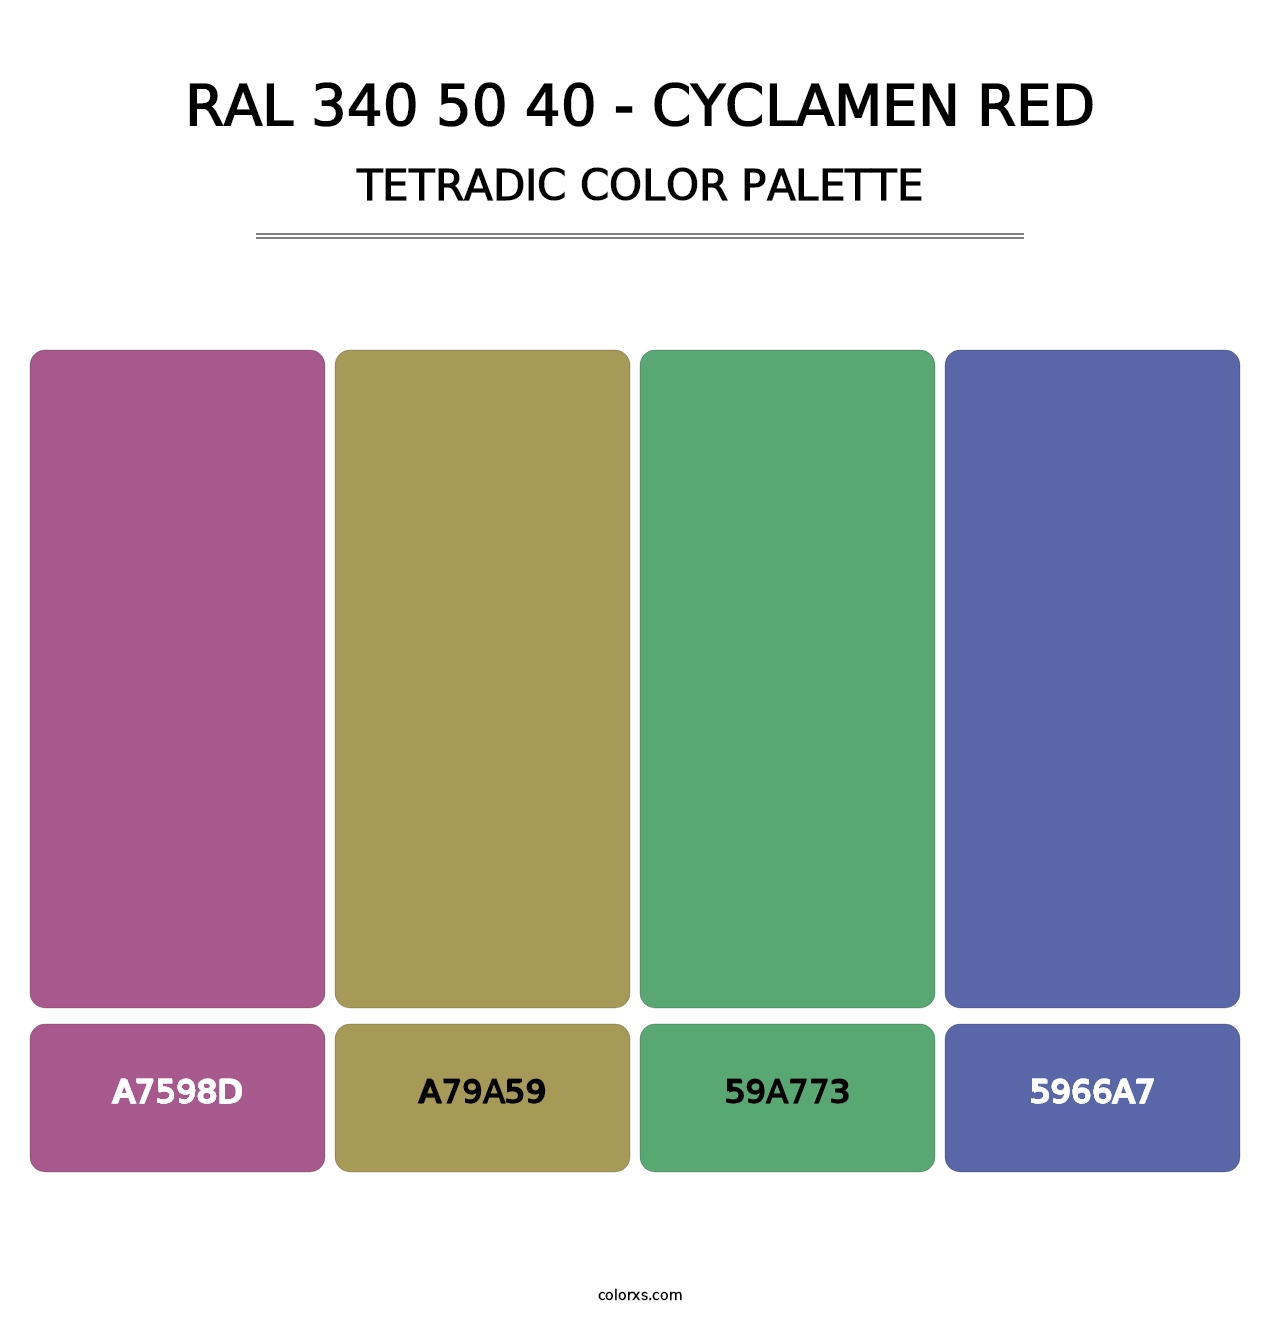 RAL 340 50 40 - Cyclamen Red - Tetradic Color Palette